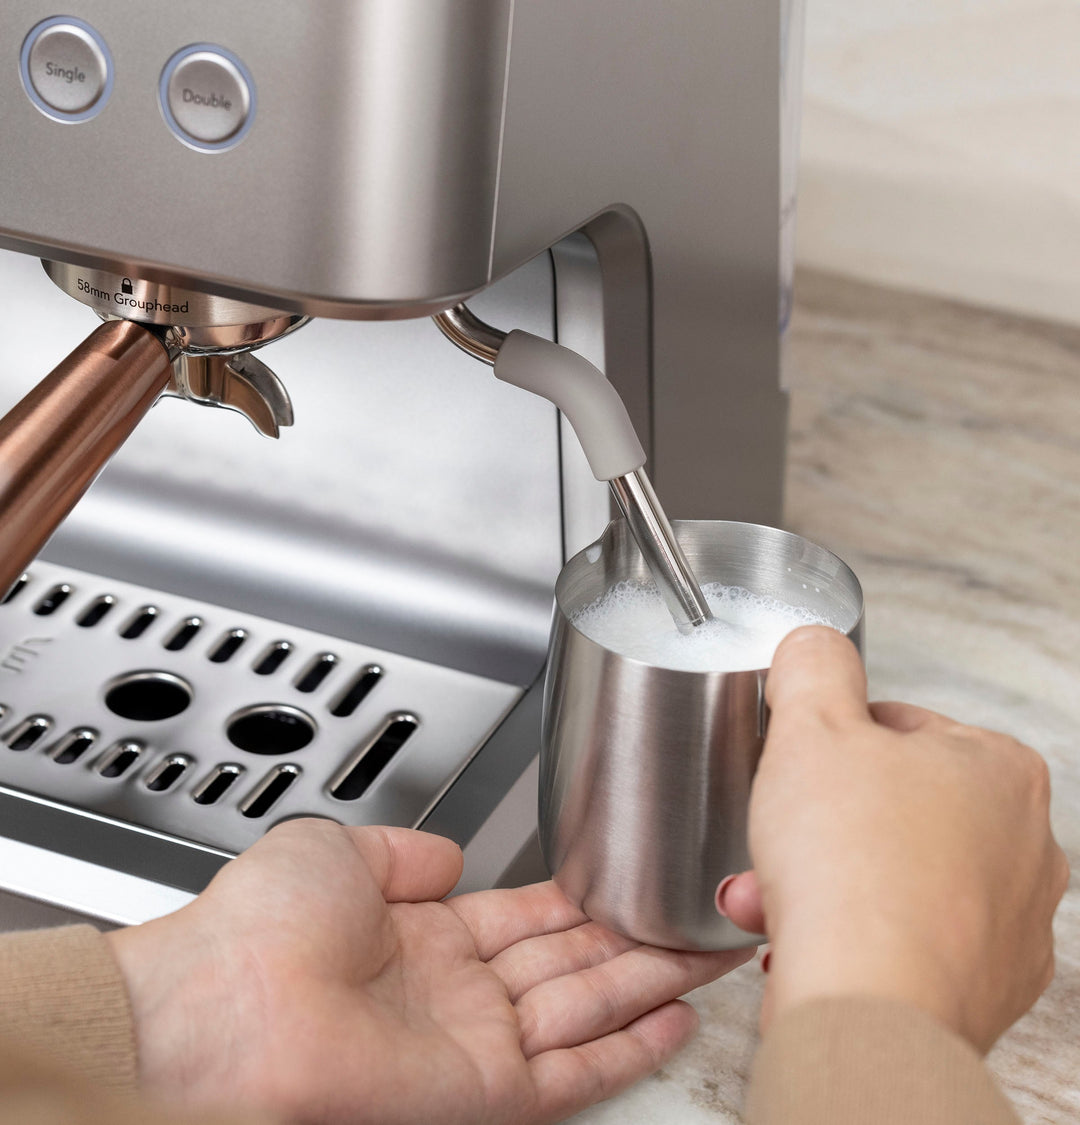 Café - Bellissimo Semi-Automatic Espresso Machine with 15 bars of pressure, Milk Frother, and Built-In Wi-Fi - Steel Silver_19